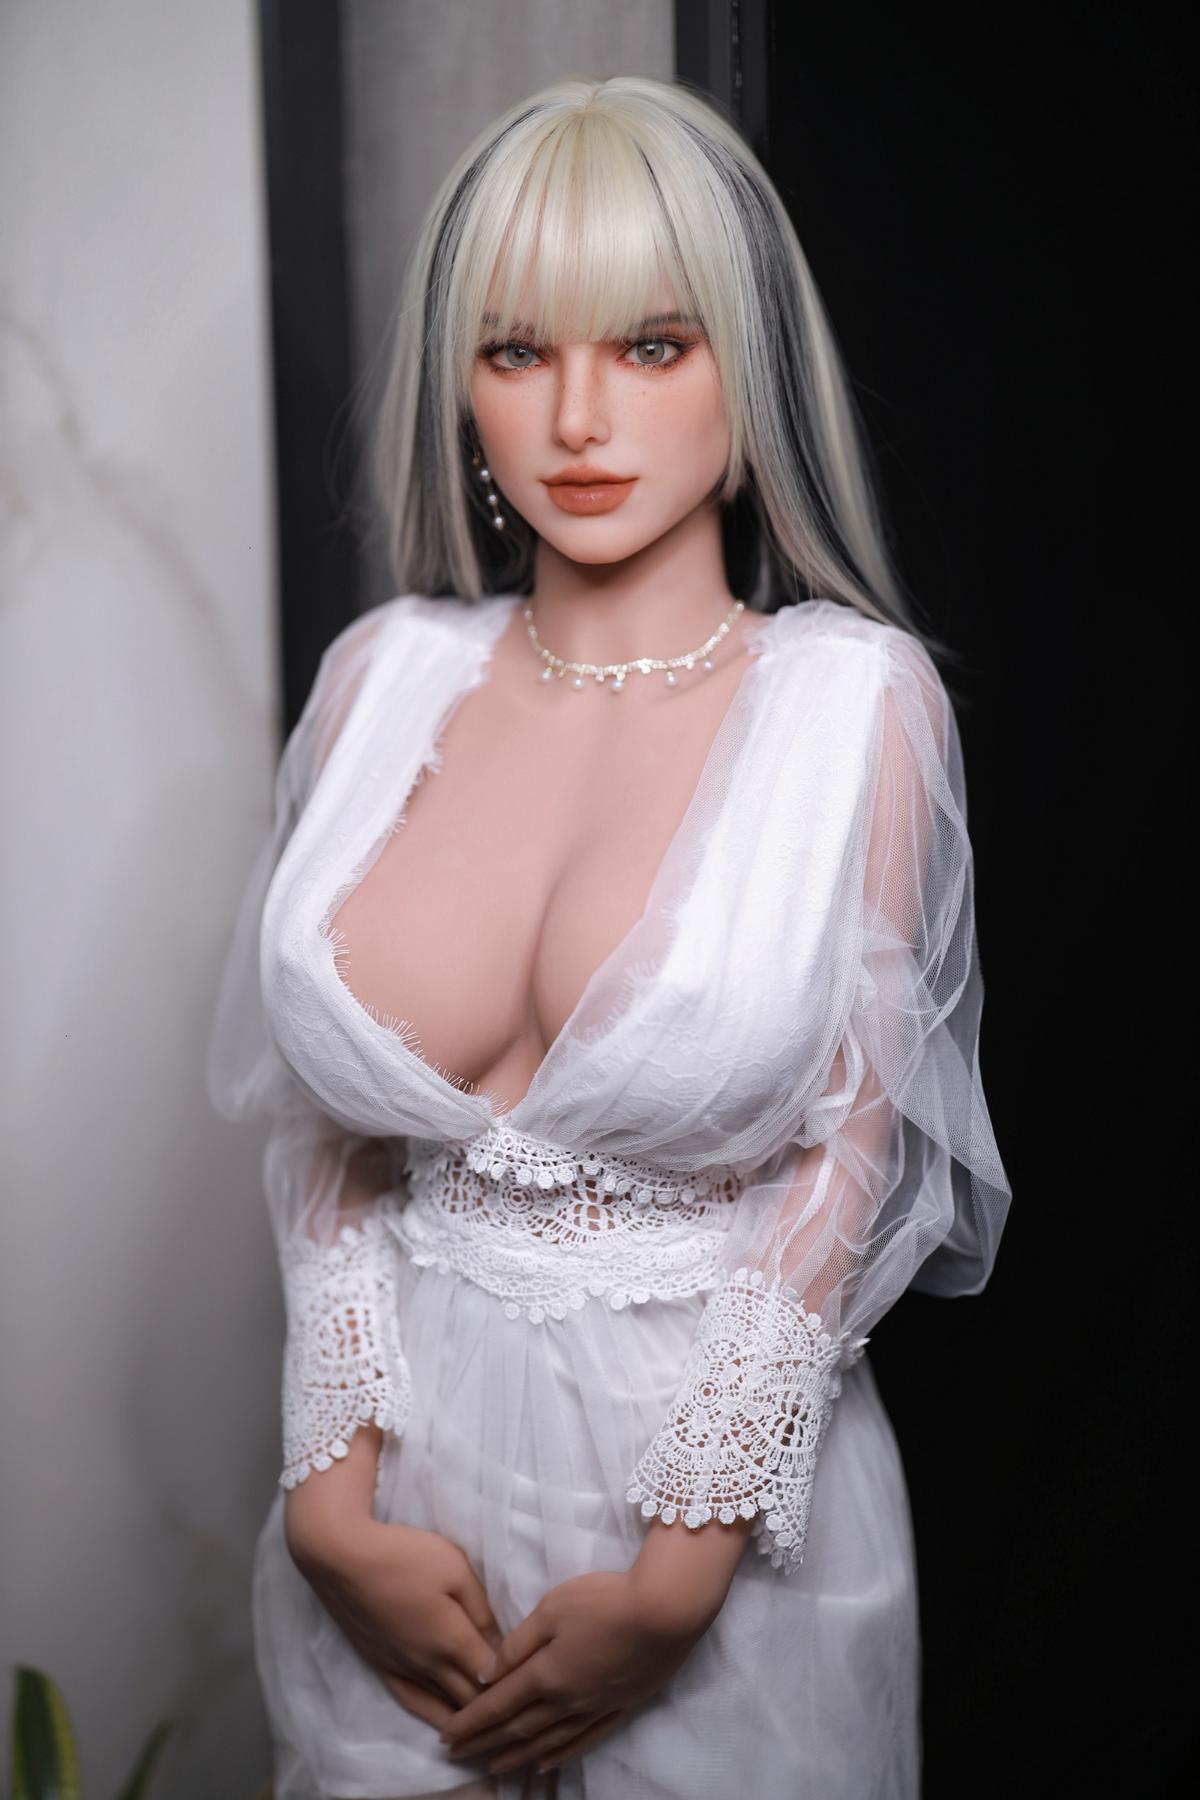 Goedkope Sexdoll Holly | Best Seller Real Doll